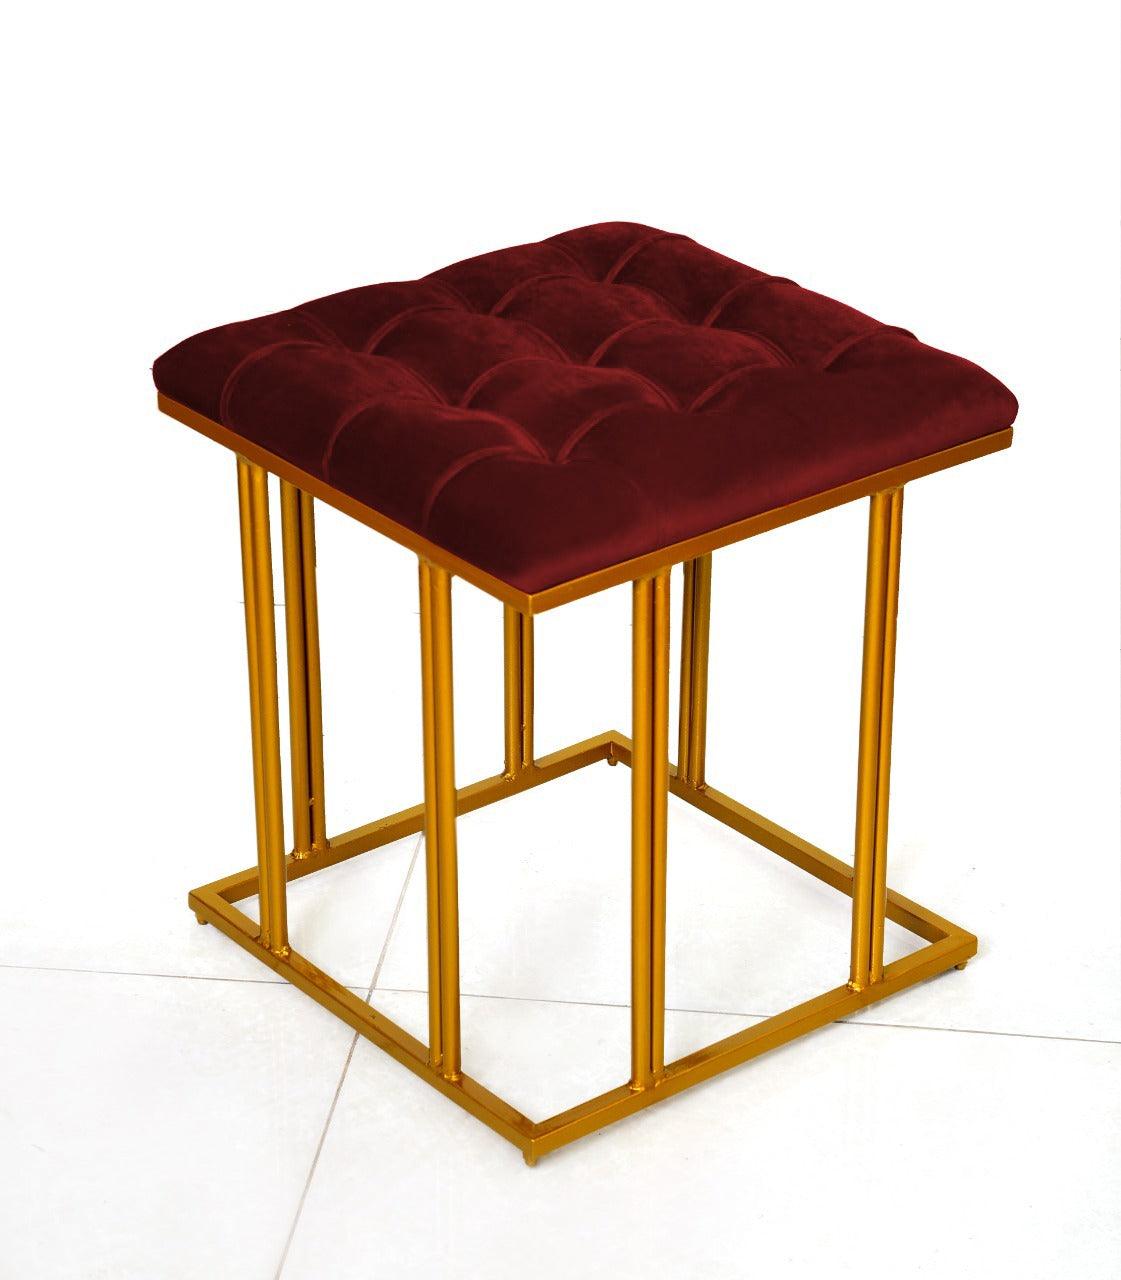 Luxury Velvet Square Stool With Steel Stand -903 - 92Bedding